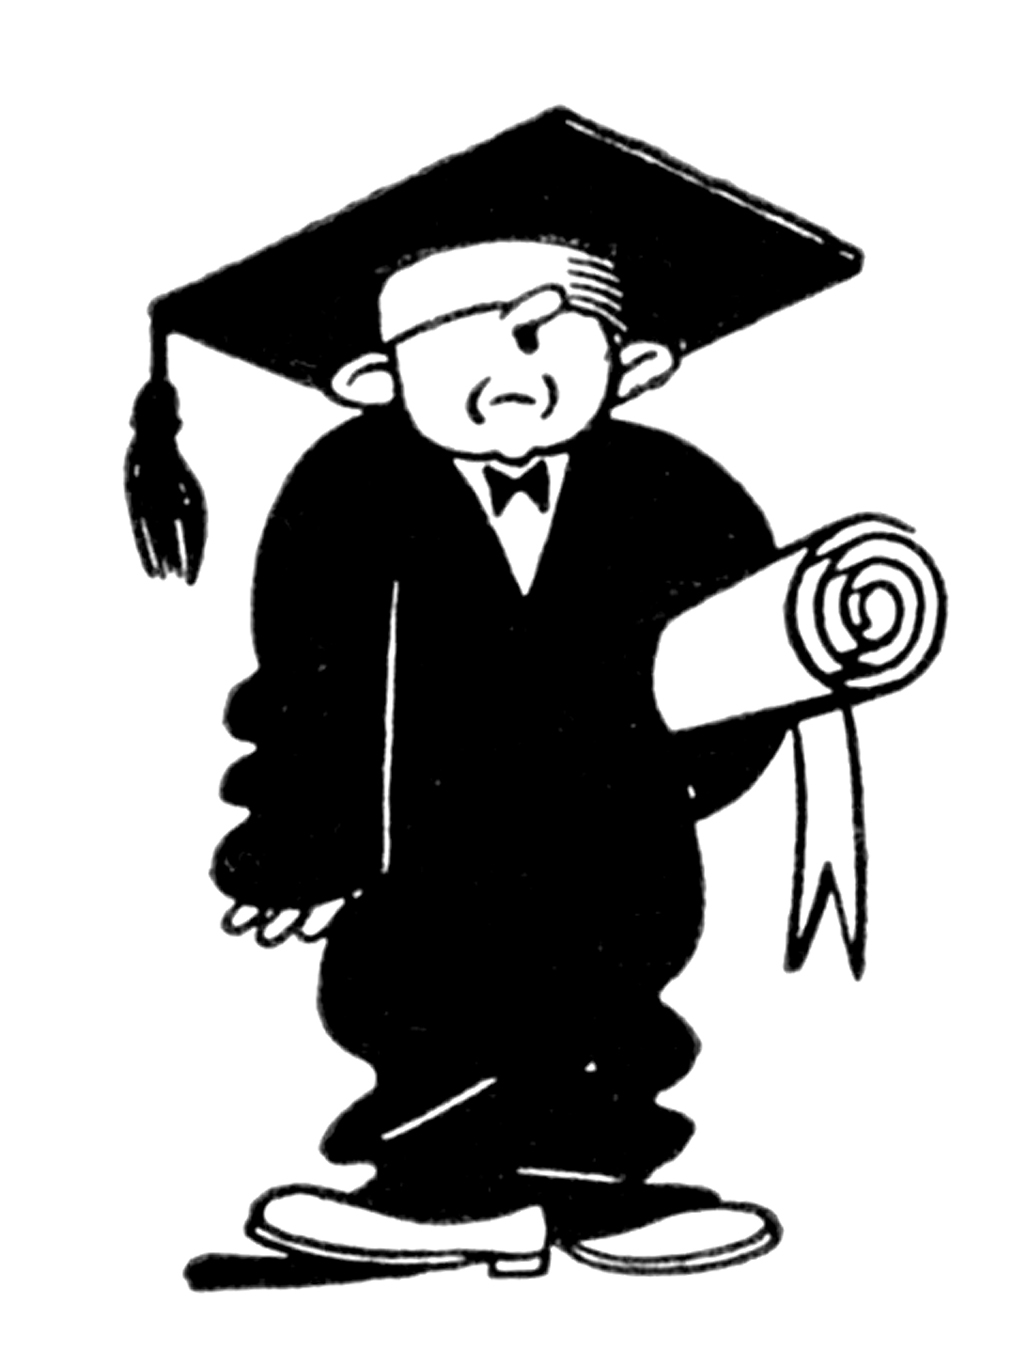 ... High School Counseling; Quirky Retro Graduate Clip Art - Education - The Graphics Fairy ...